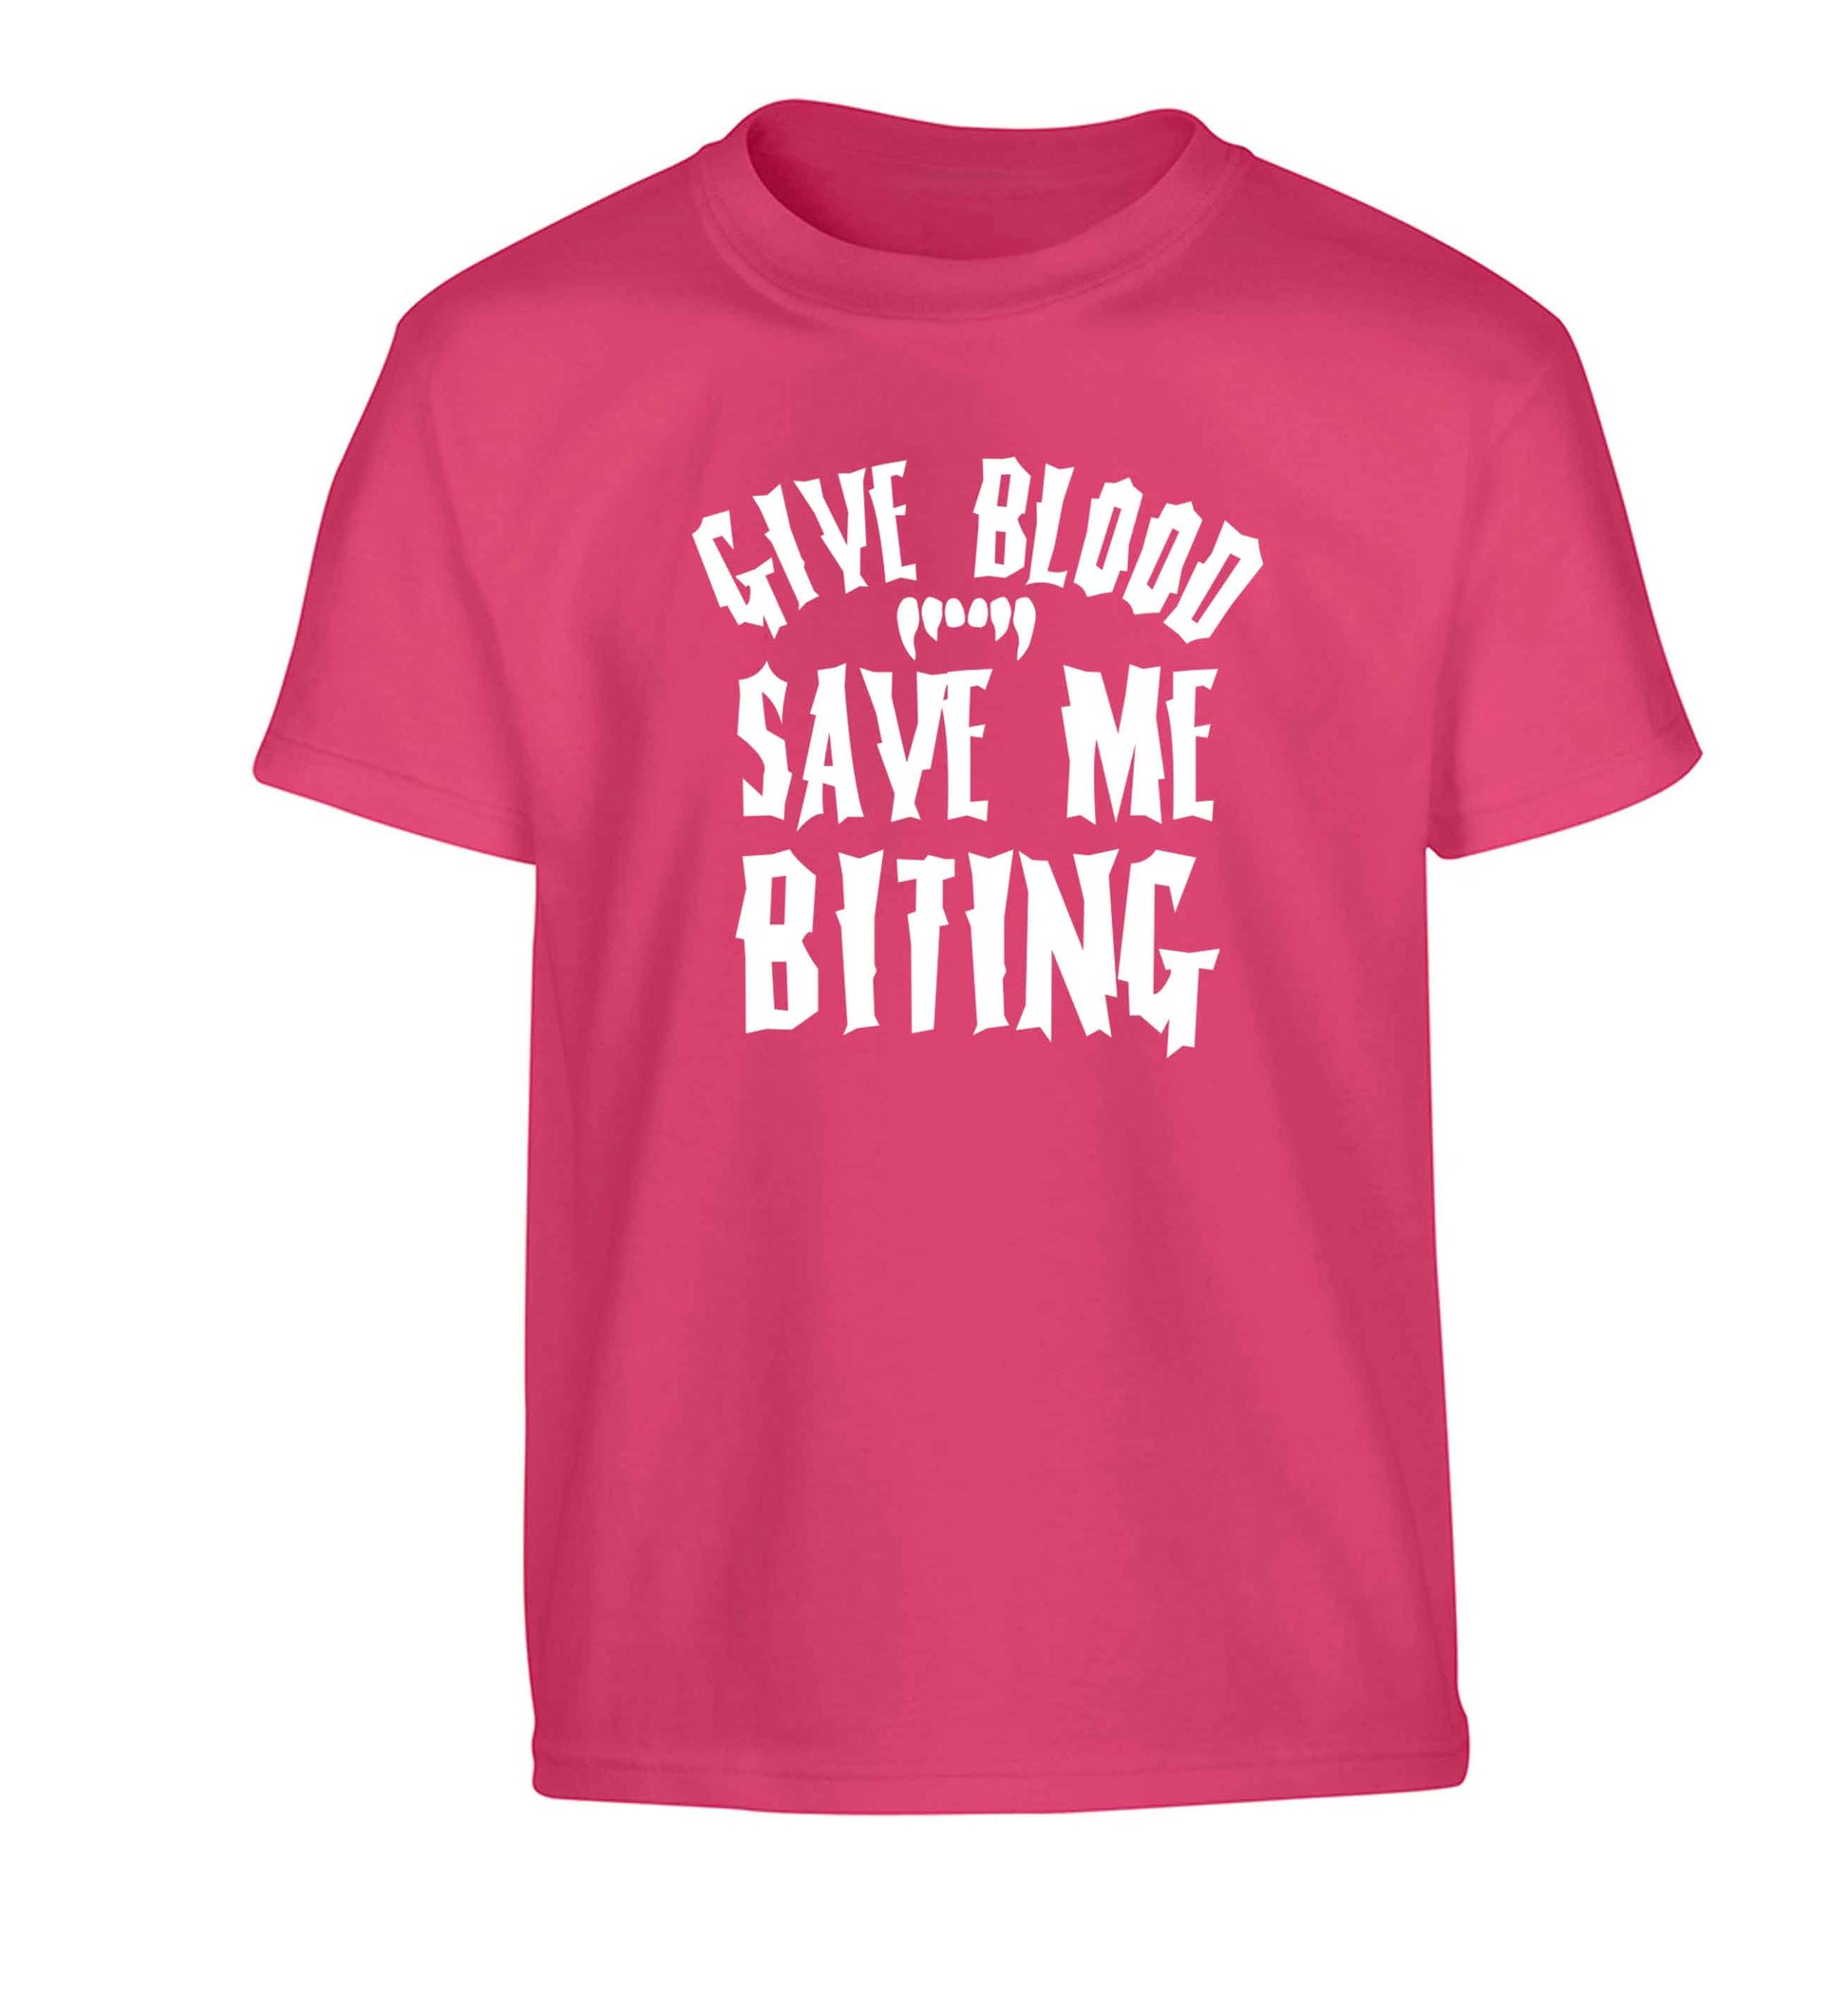 Give blood save me biting Children's pink Tshirt 12-13 Years